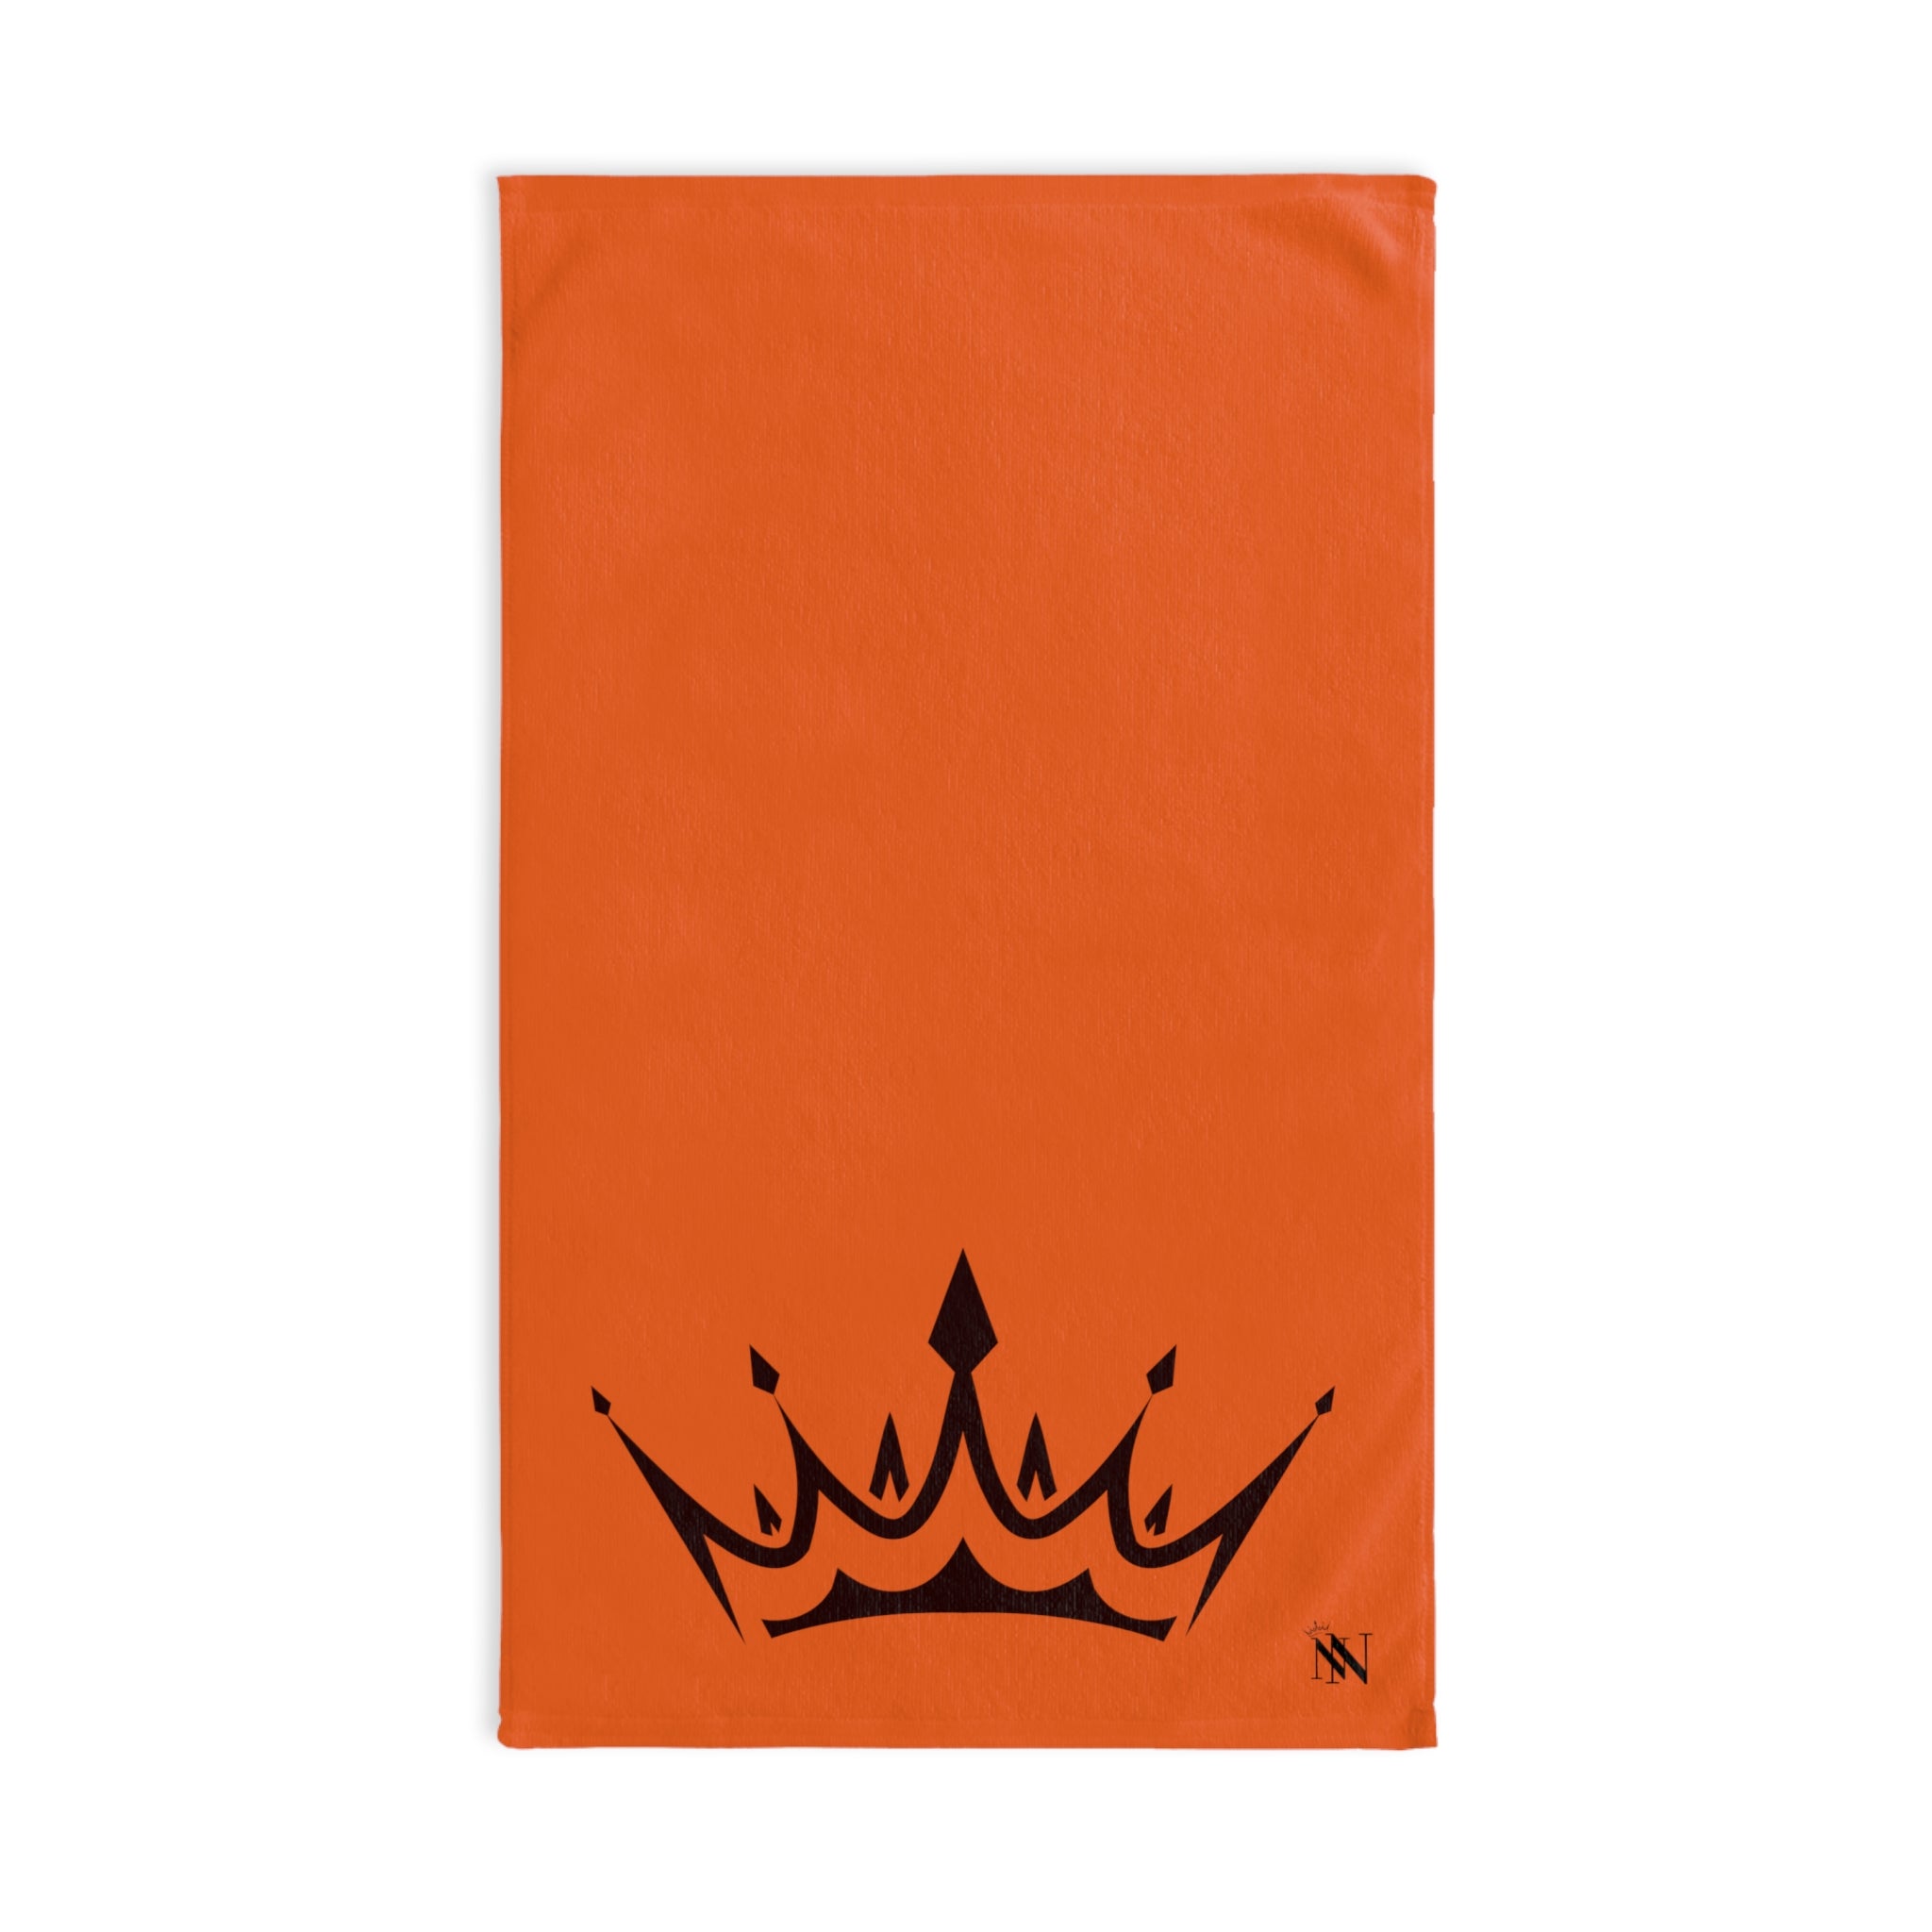 Black Crown Orange | Funny Gifts for Men - Gifts for Him - Birthday Gifts for Men, Him, Husband, Boyfriend, New Couple Gifts, Fathers & Valentines Day Gifts, Hand Towels NECTAR NAPKINS